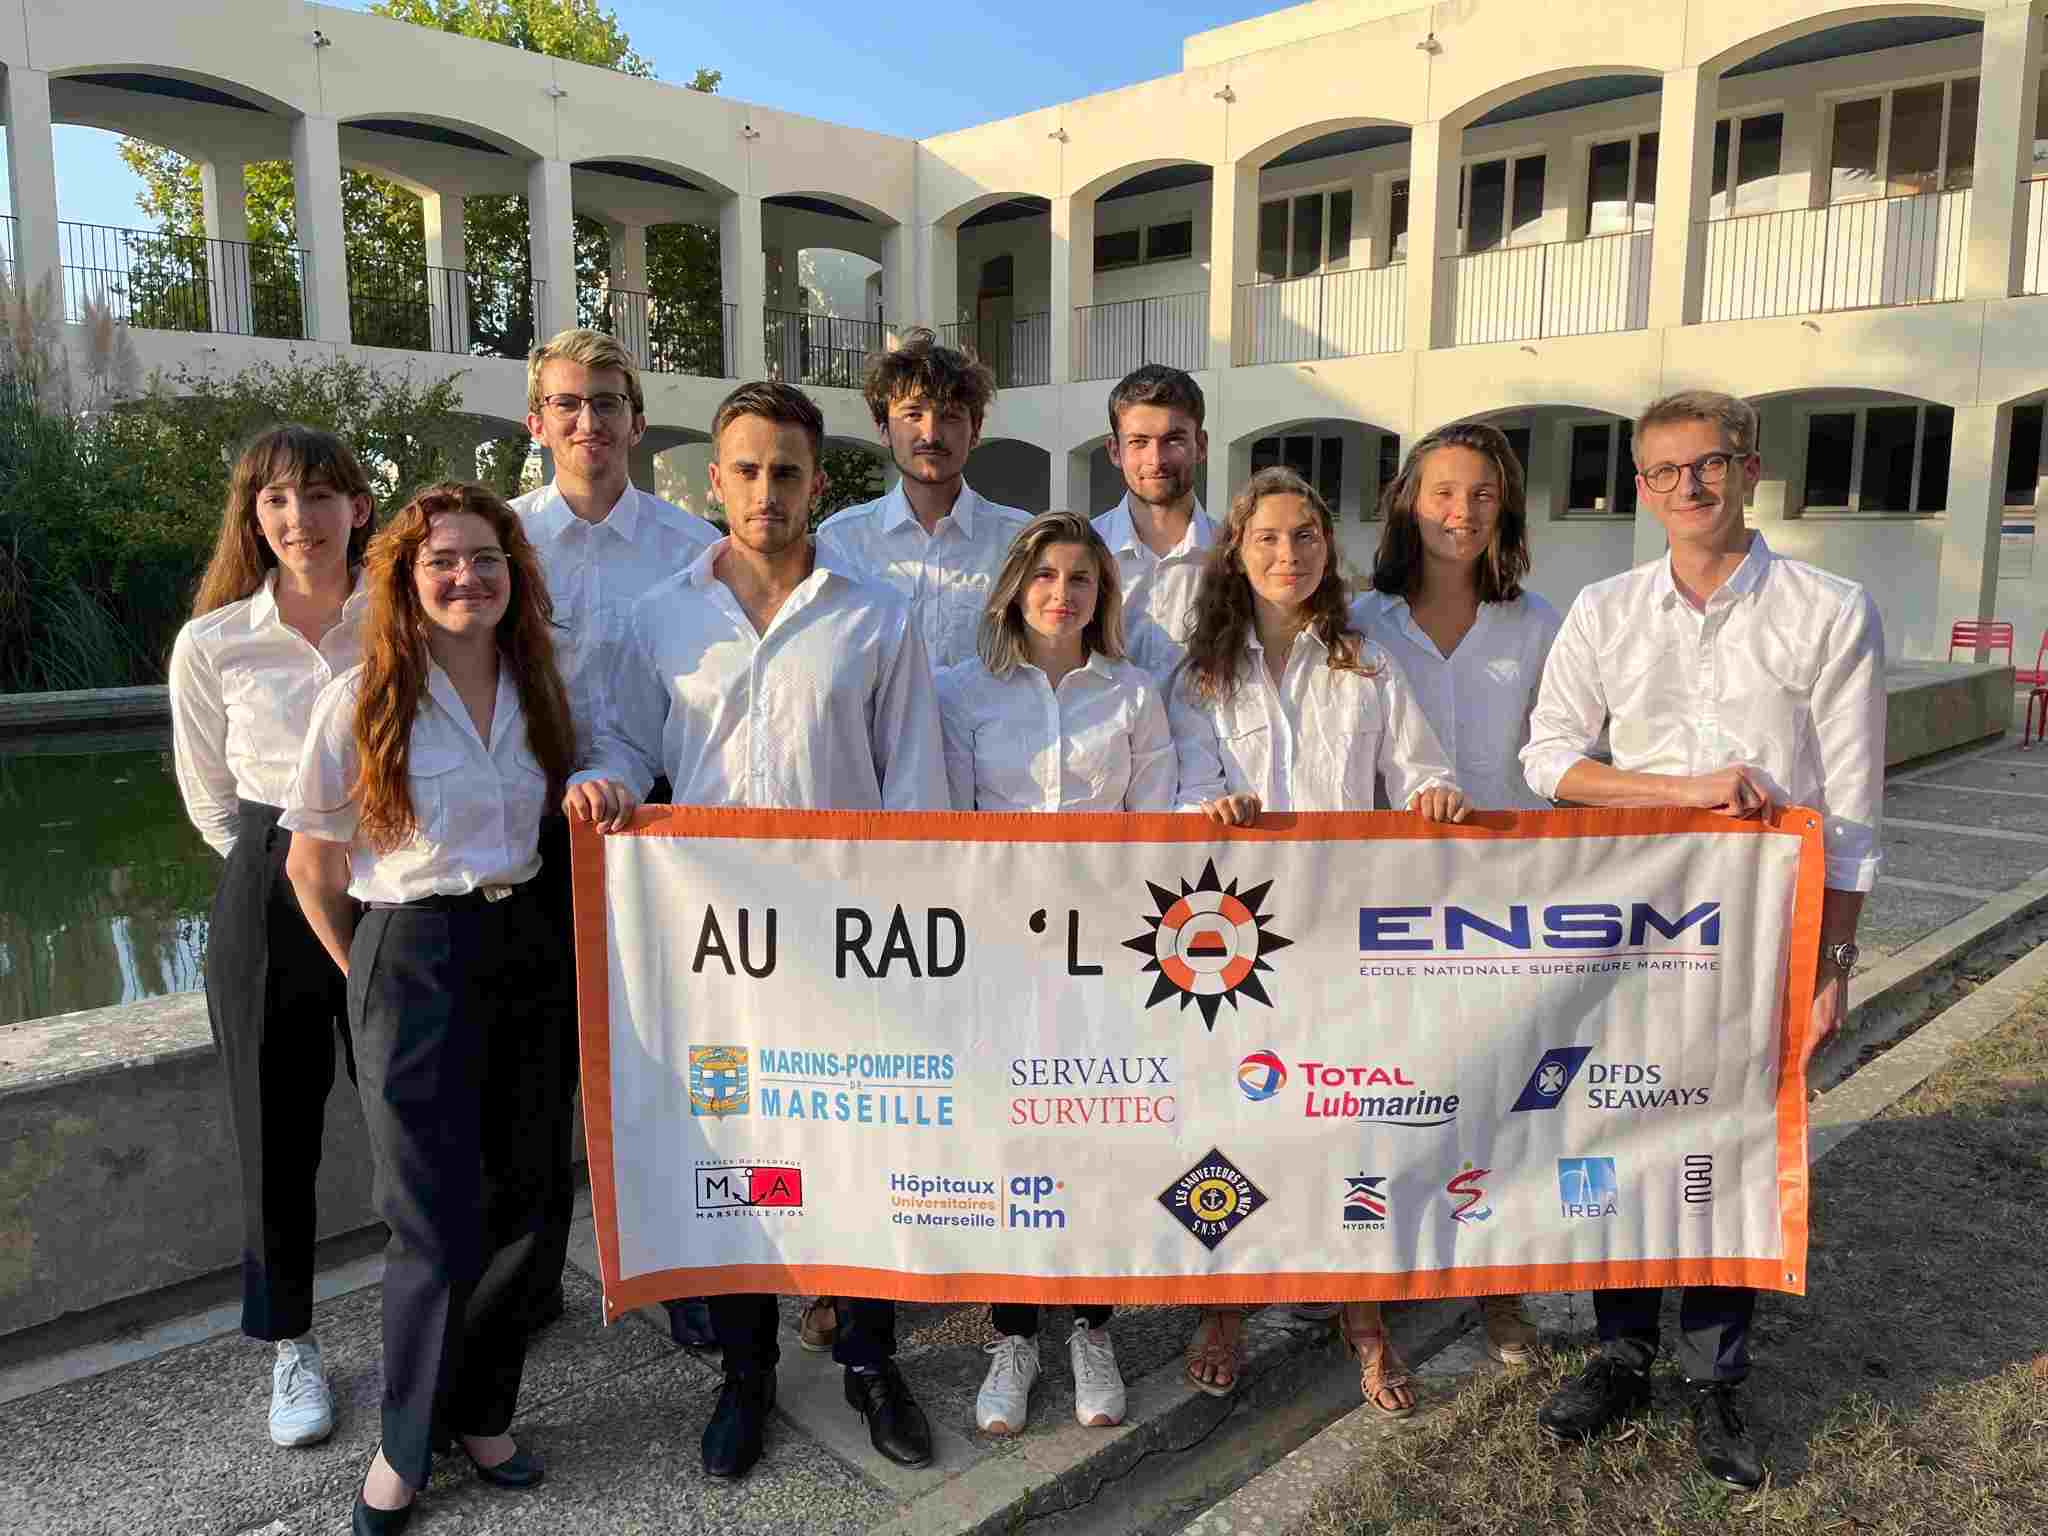 ENSM students from Rad'Lo team holding their association banner with Lubmarine logo